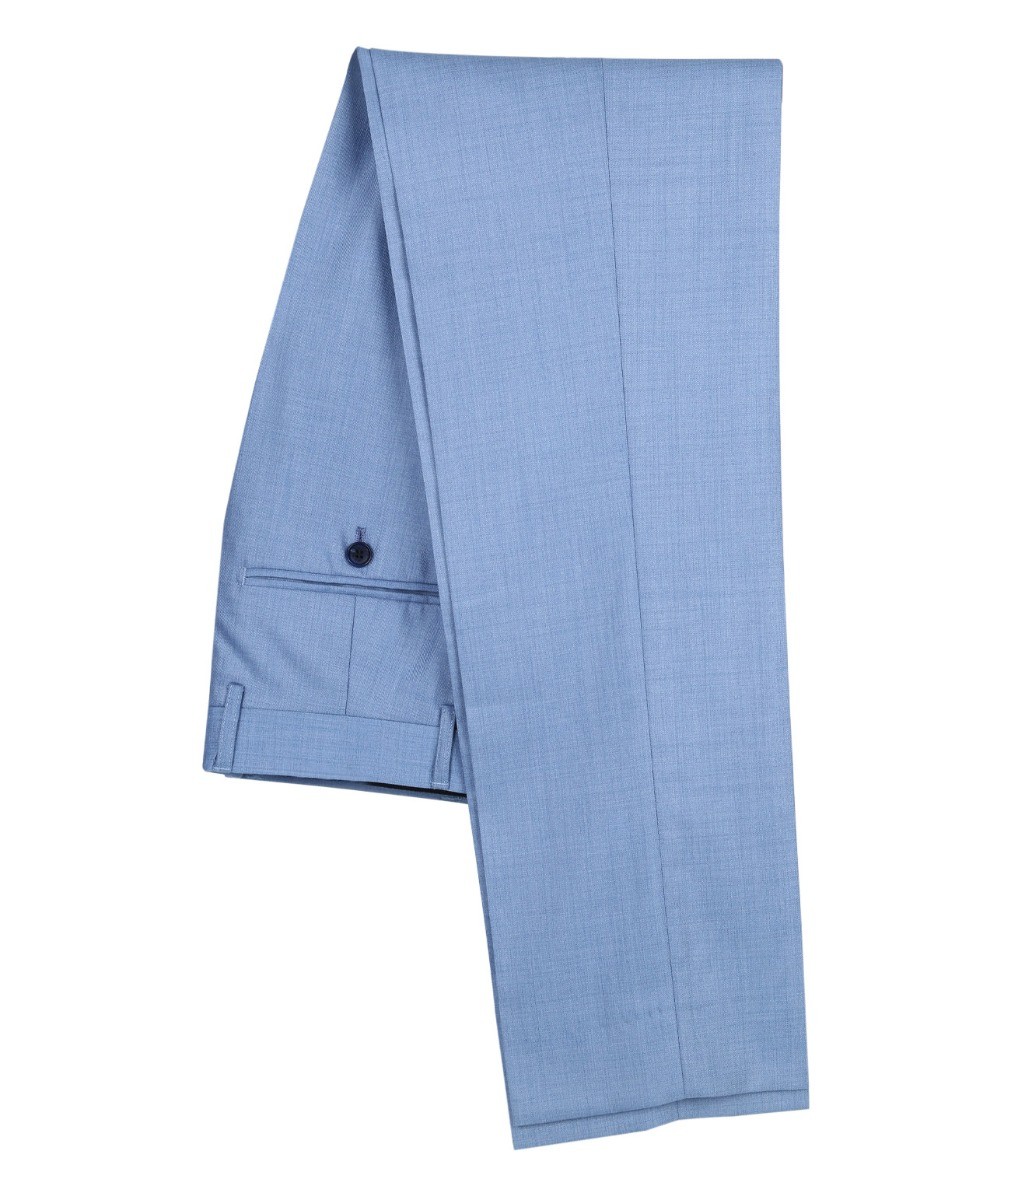 Men's Tailored Fit Formal Trousers  - CHARLES - Blue